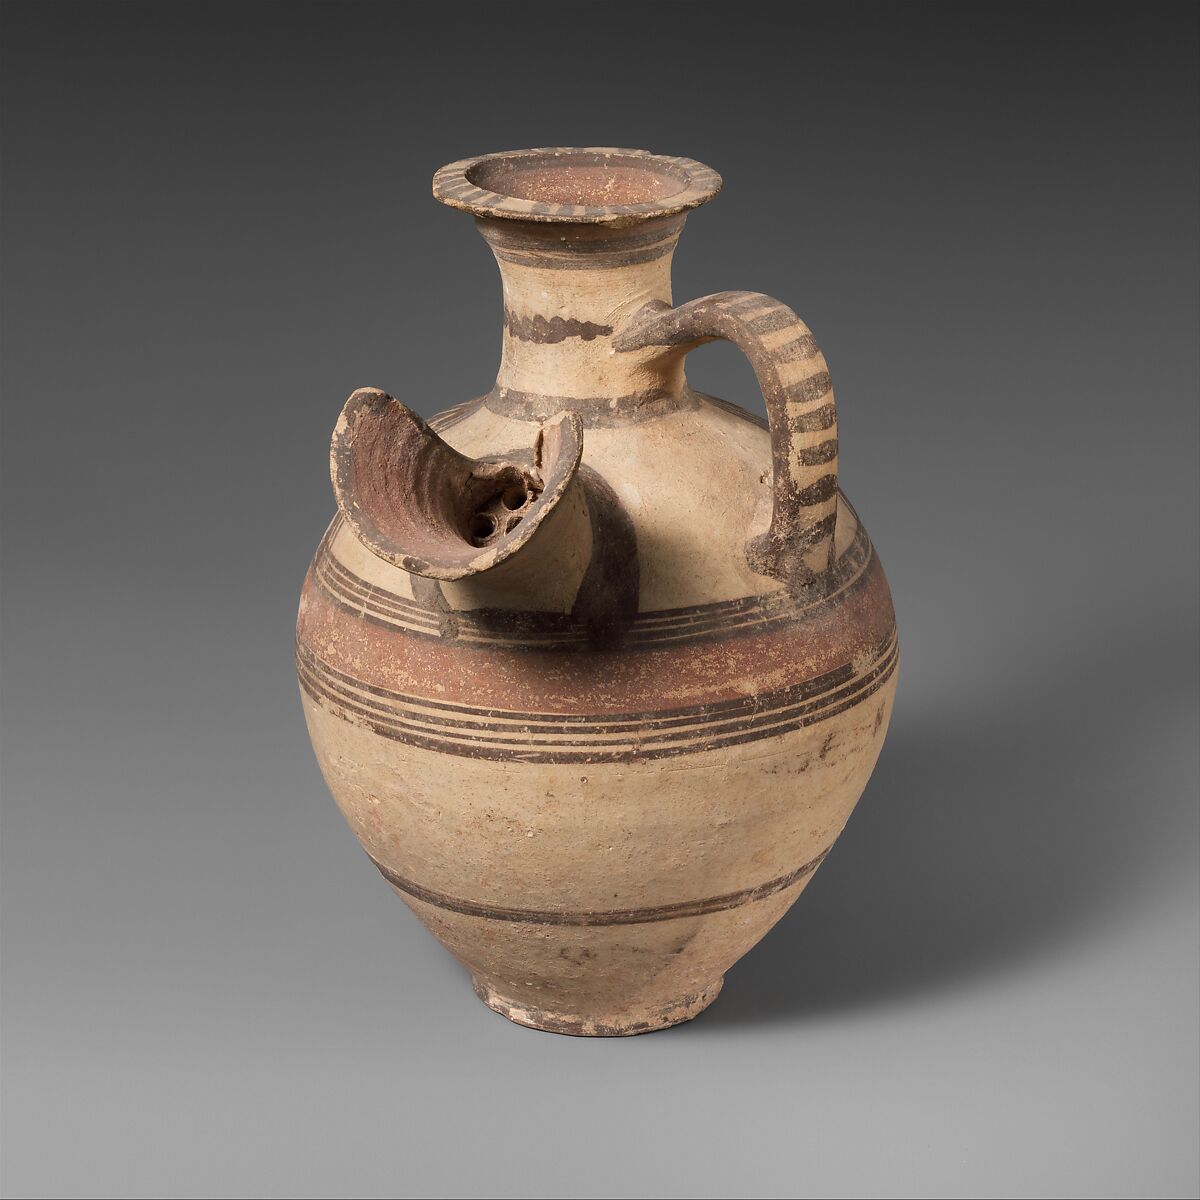 Terracotta jug with trough spout, Terracotta, Cypriot 